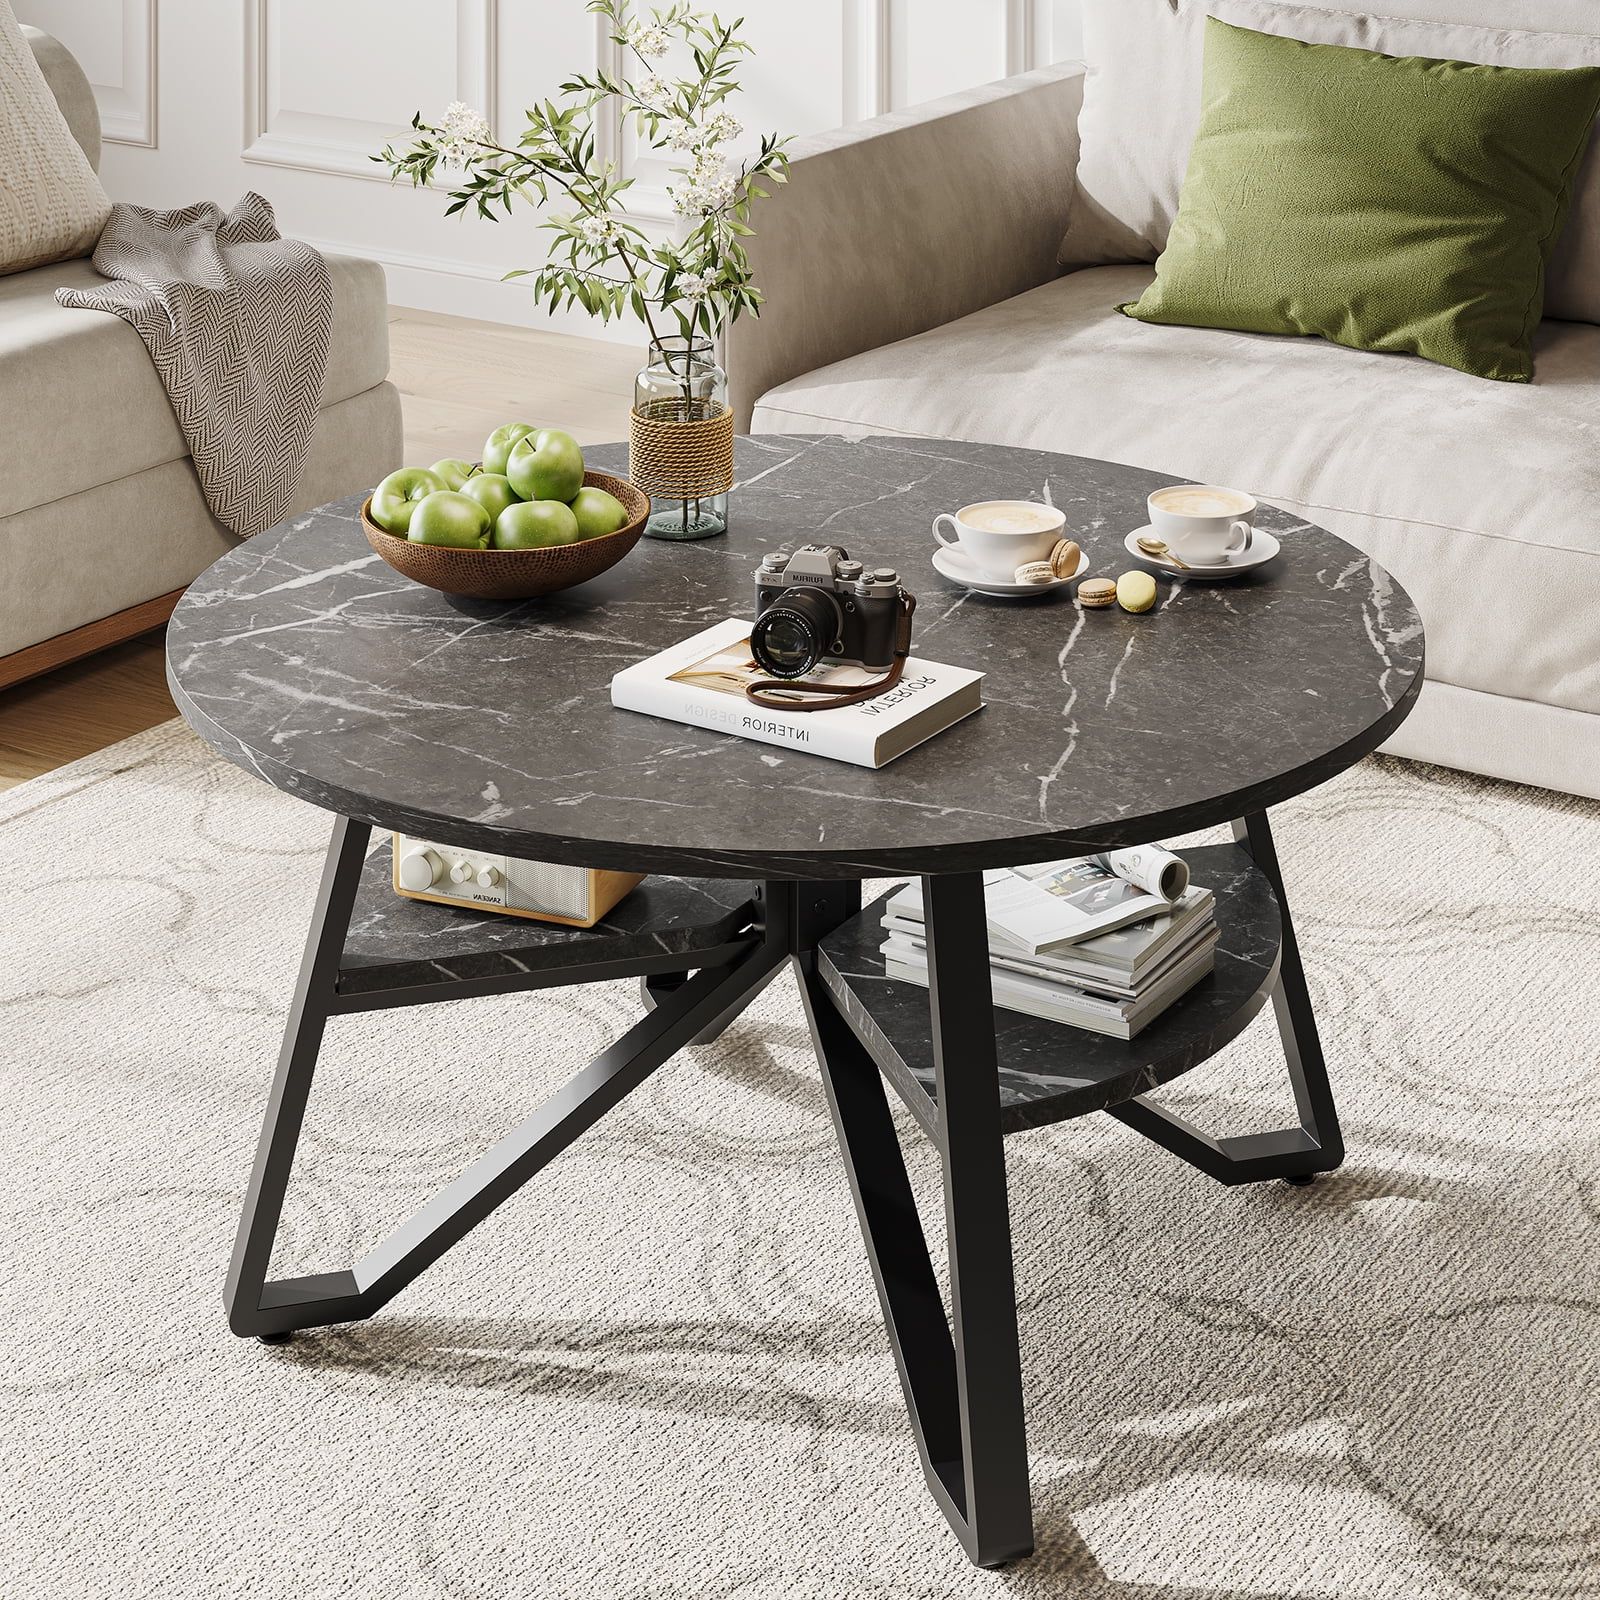 Round Coffee Tables With Steel Frames Inside Widely Used Bestier Round Coffee Table With Storage, Living Room Tables With Sturdy  Metal Legs, Black Marble – Walmart (View 8 of 10)